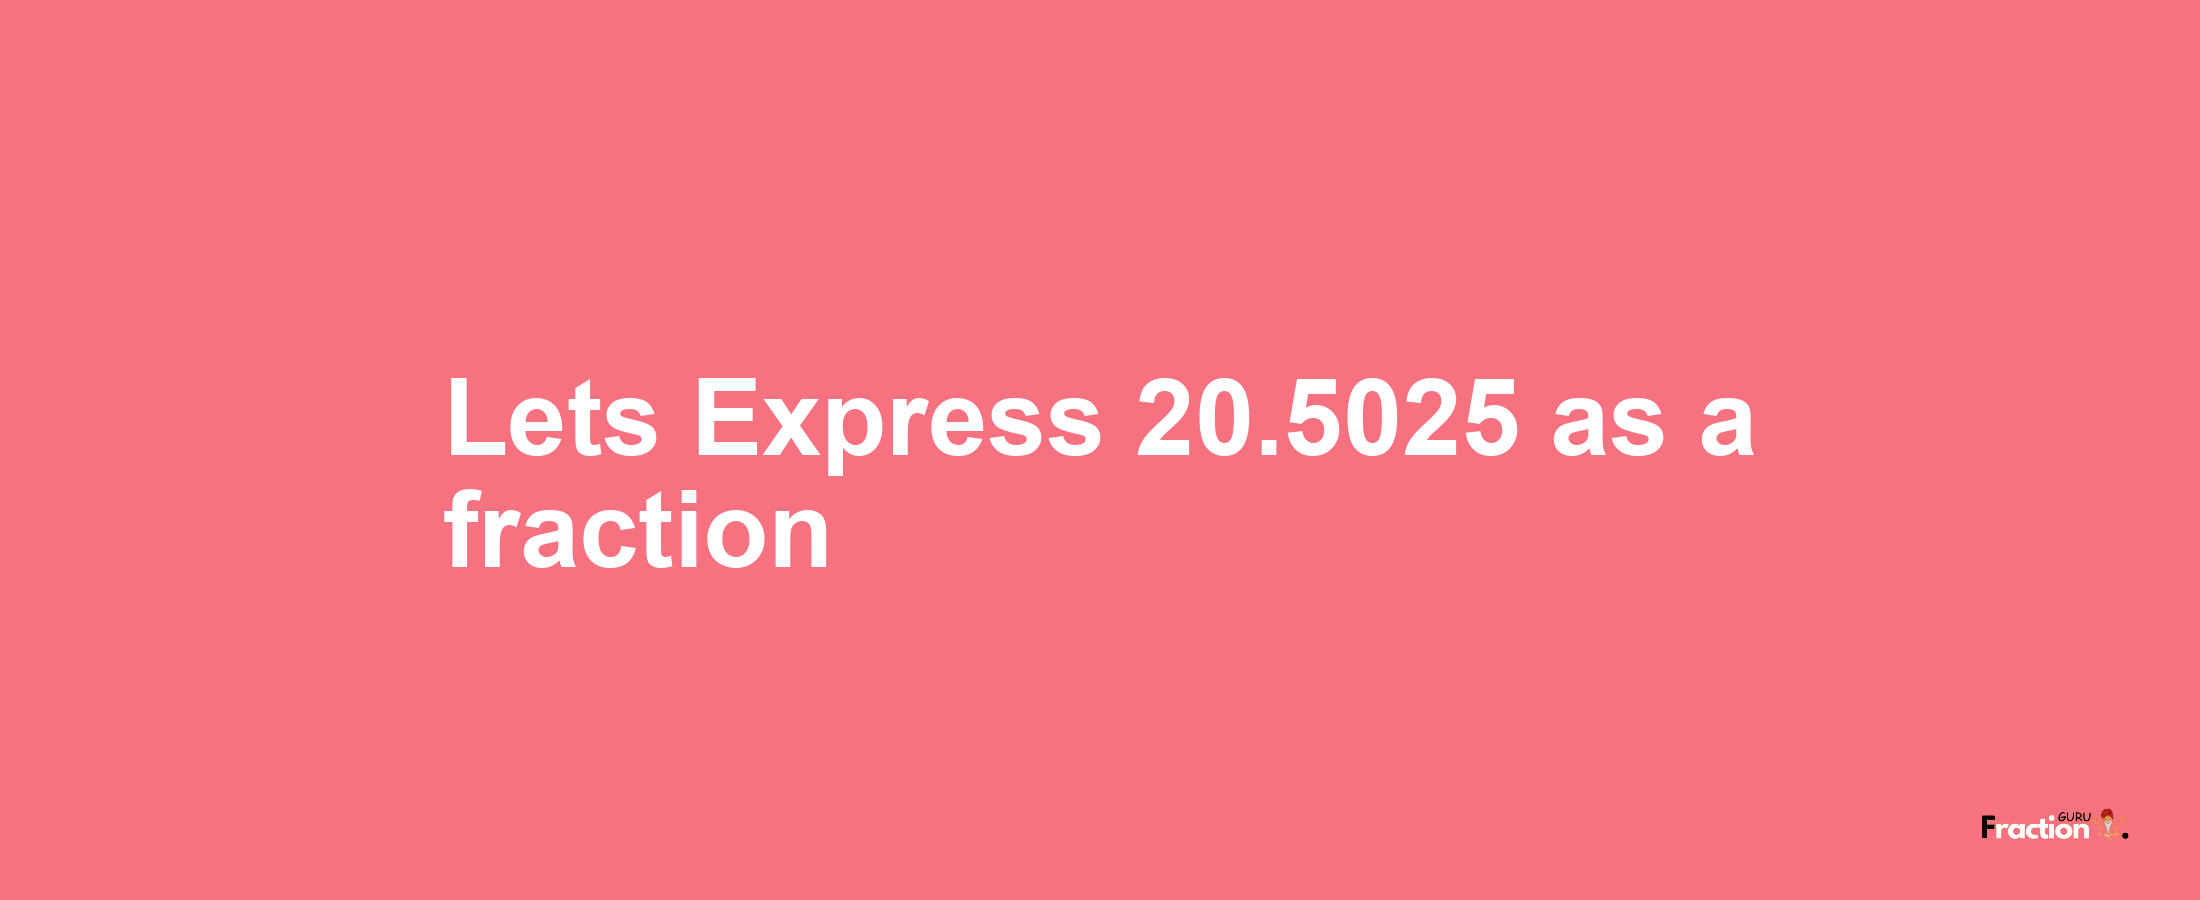 Lets Express 20.5025 as afraction